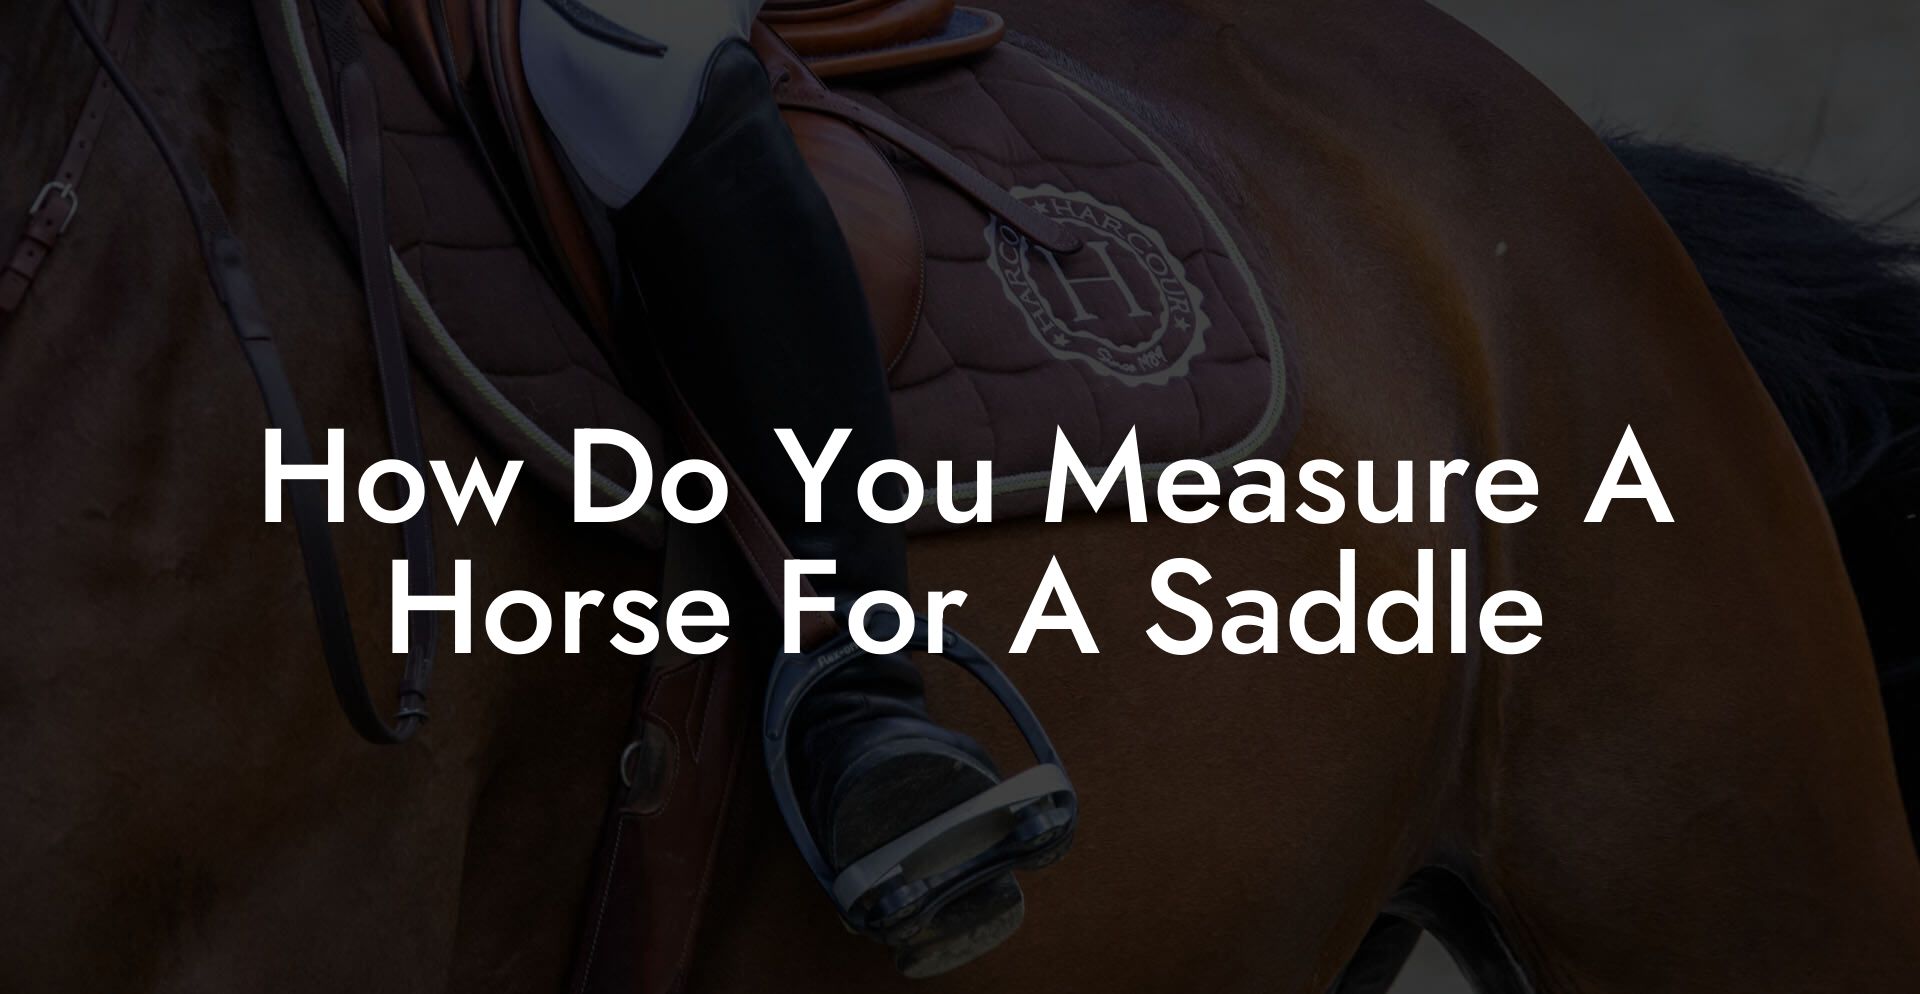 How Do You Measure A Horse For A Saddle